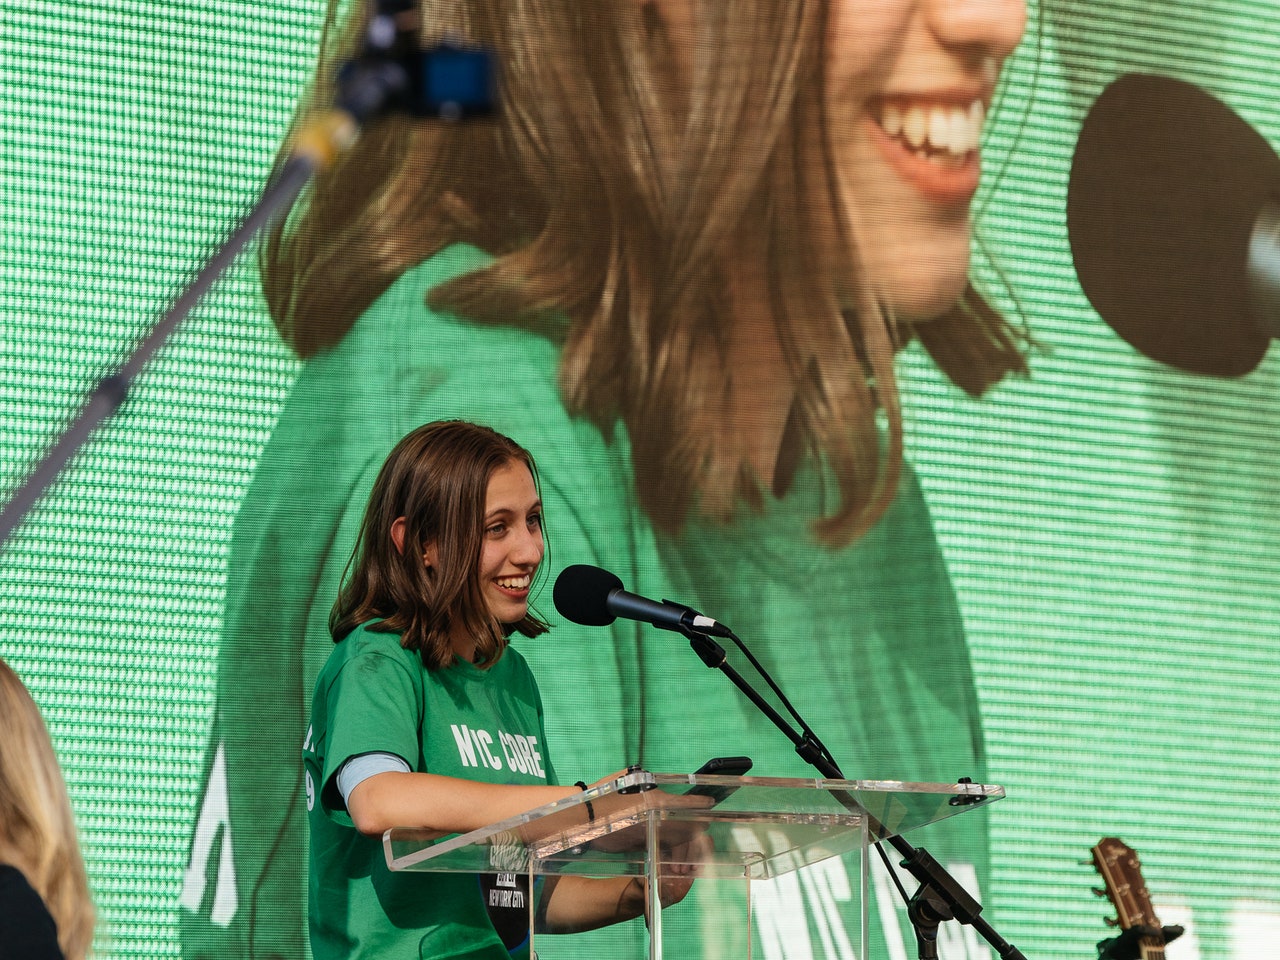 New York’s Original Teen-Age Climate Striker Welcomes a Global Movement